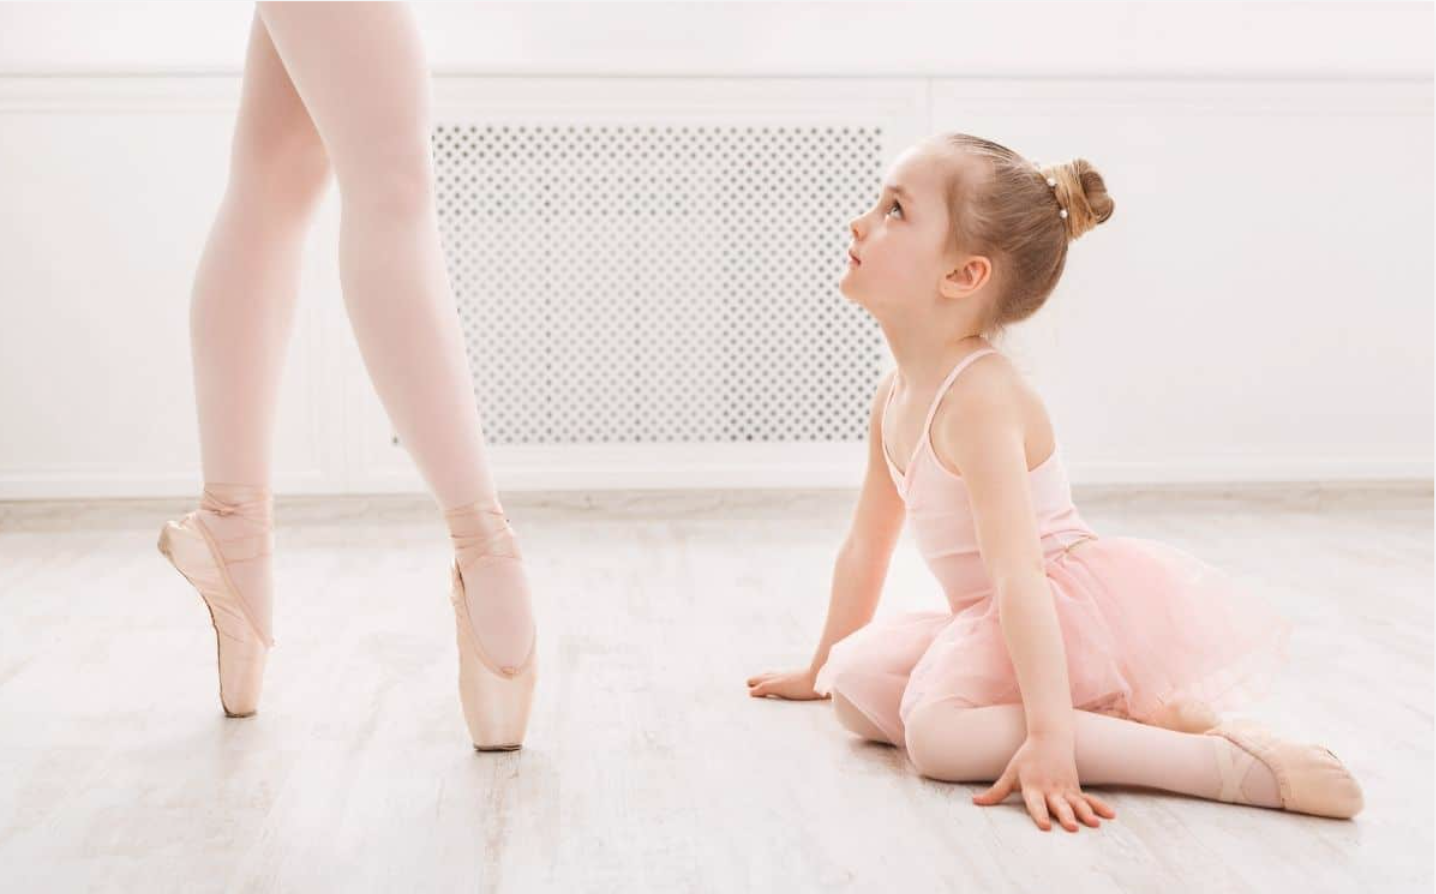 Ballerina Tights in Pink or Black Ballet Shoes for Baby to Little Girls 